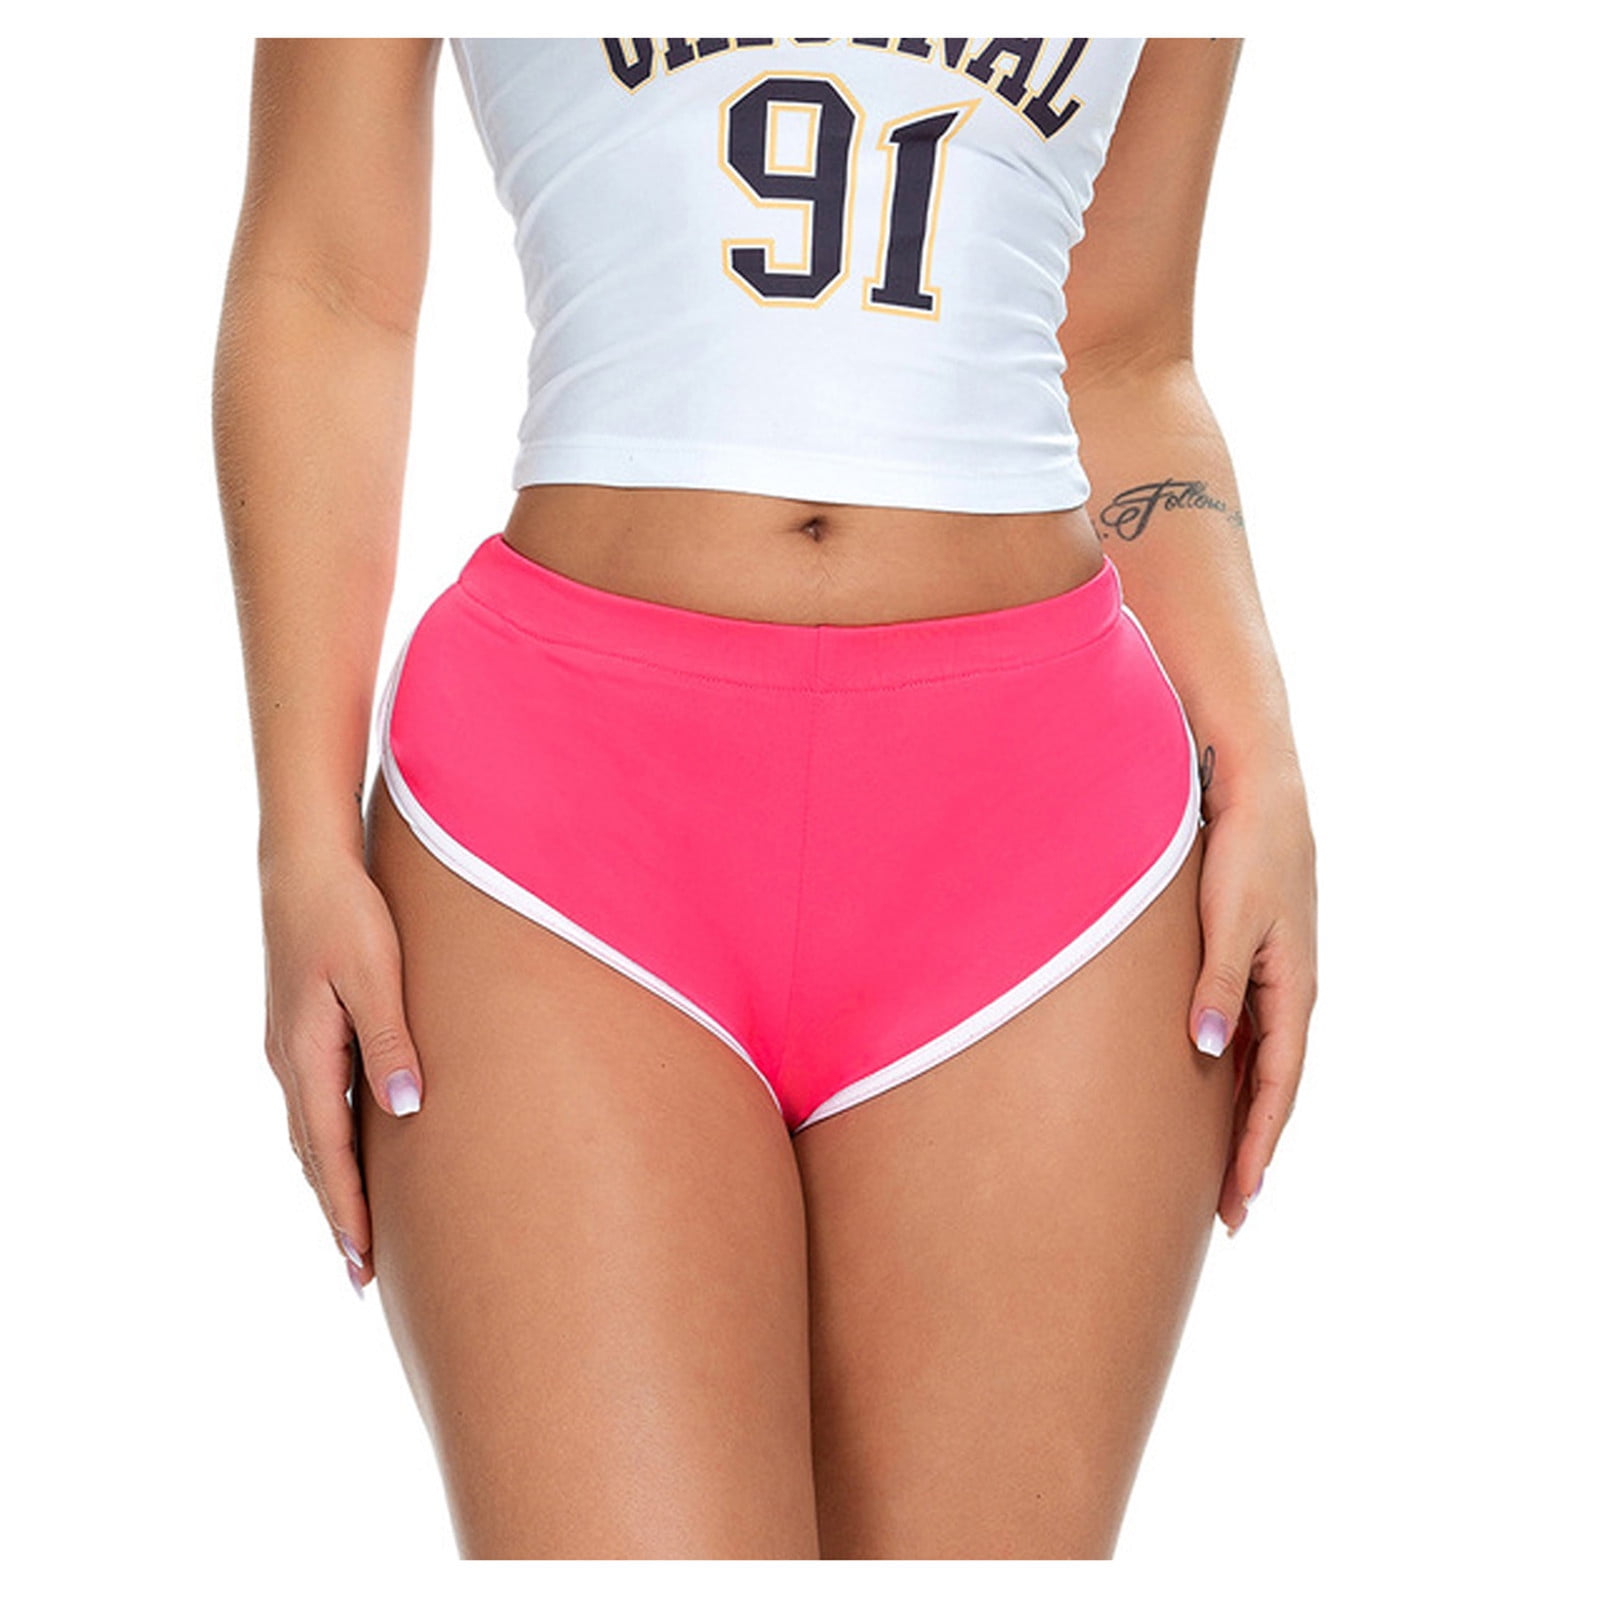 Finelylove Short Shorts For Women Sexy Big And Tall Shorts Running